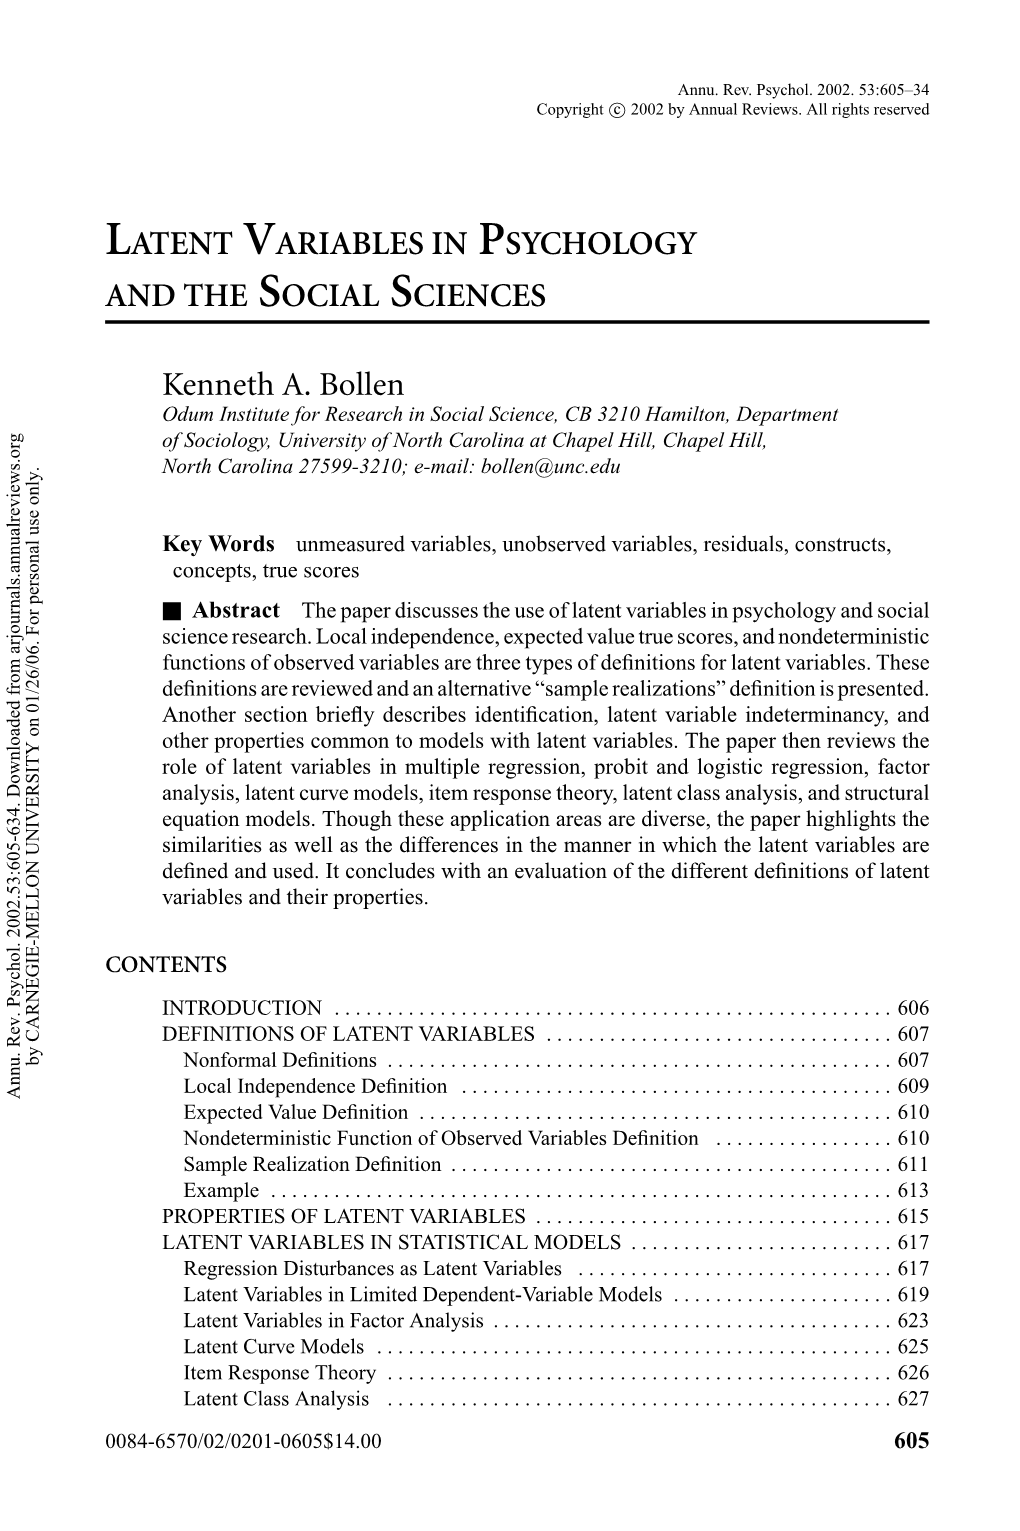 Latent Variables in Psychology and the Social Sciences